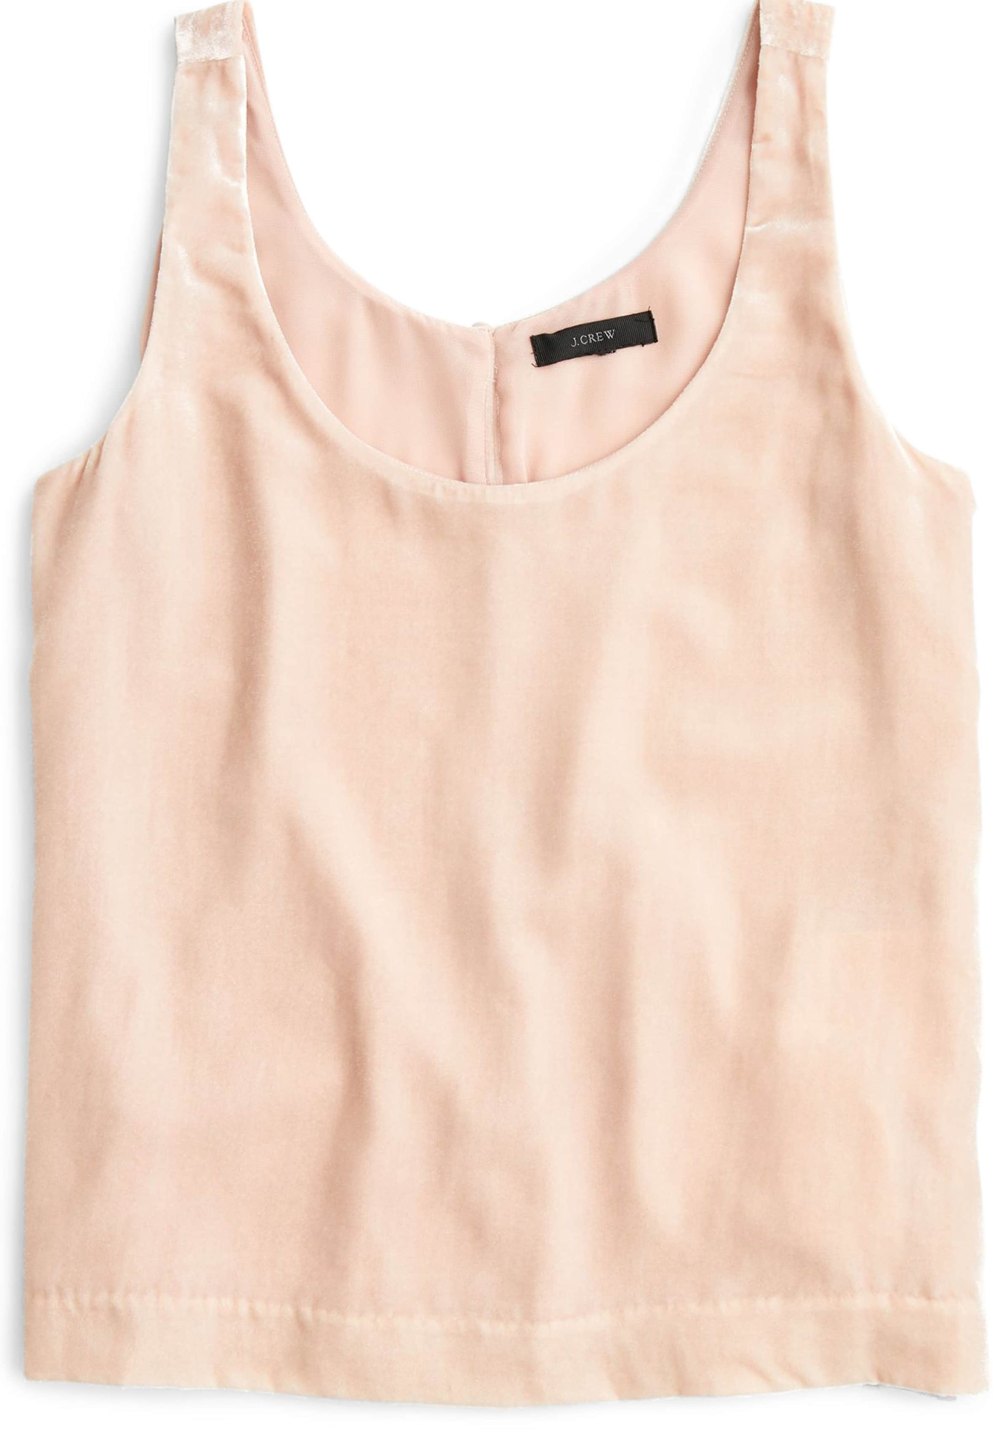 Shop This J.Crew Velvet Tank Top in Several Colors for Fall | Us Weekly